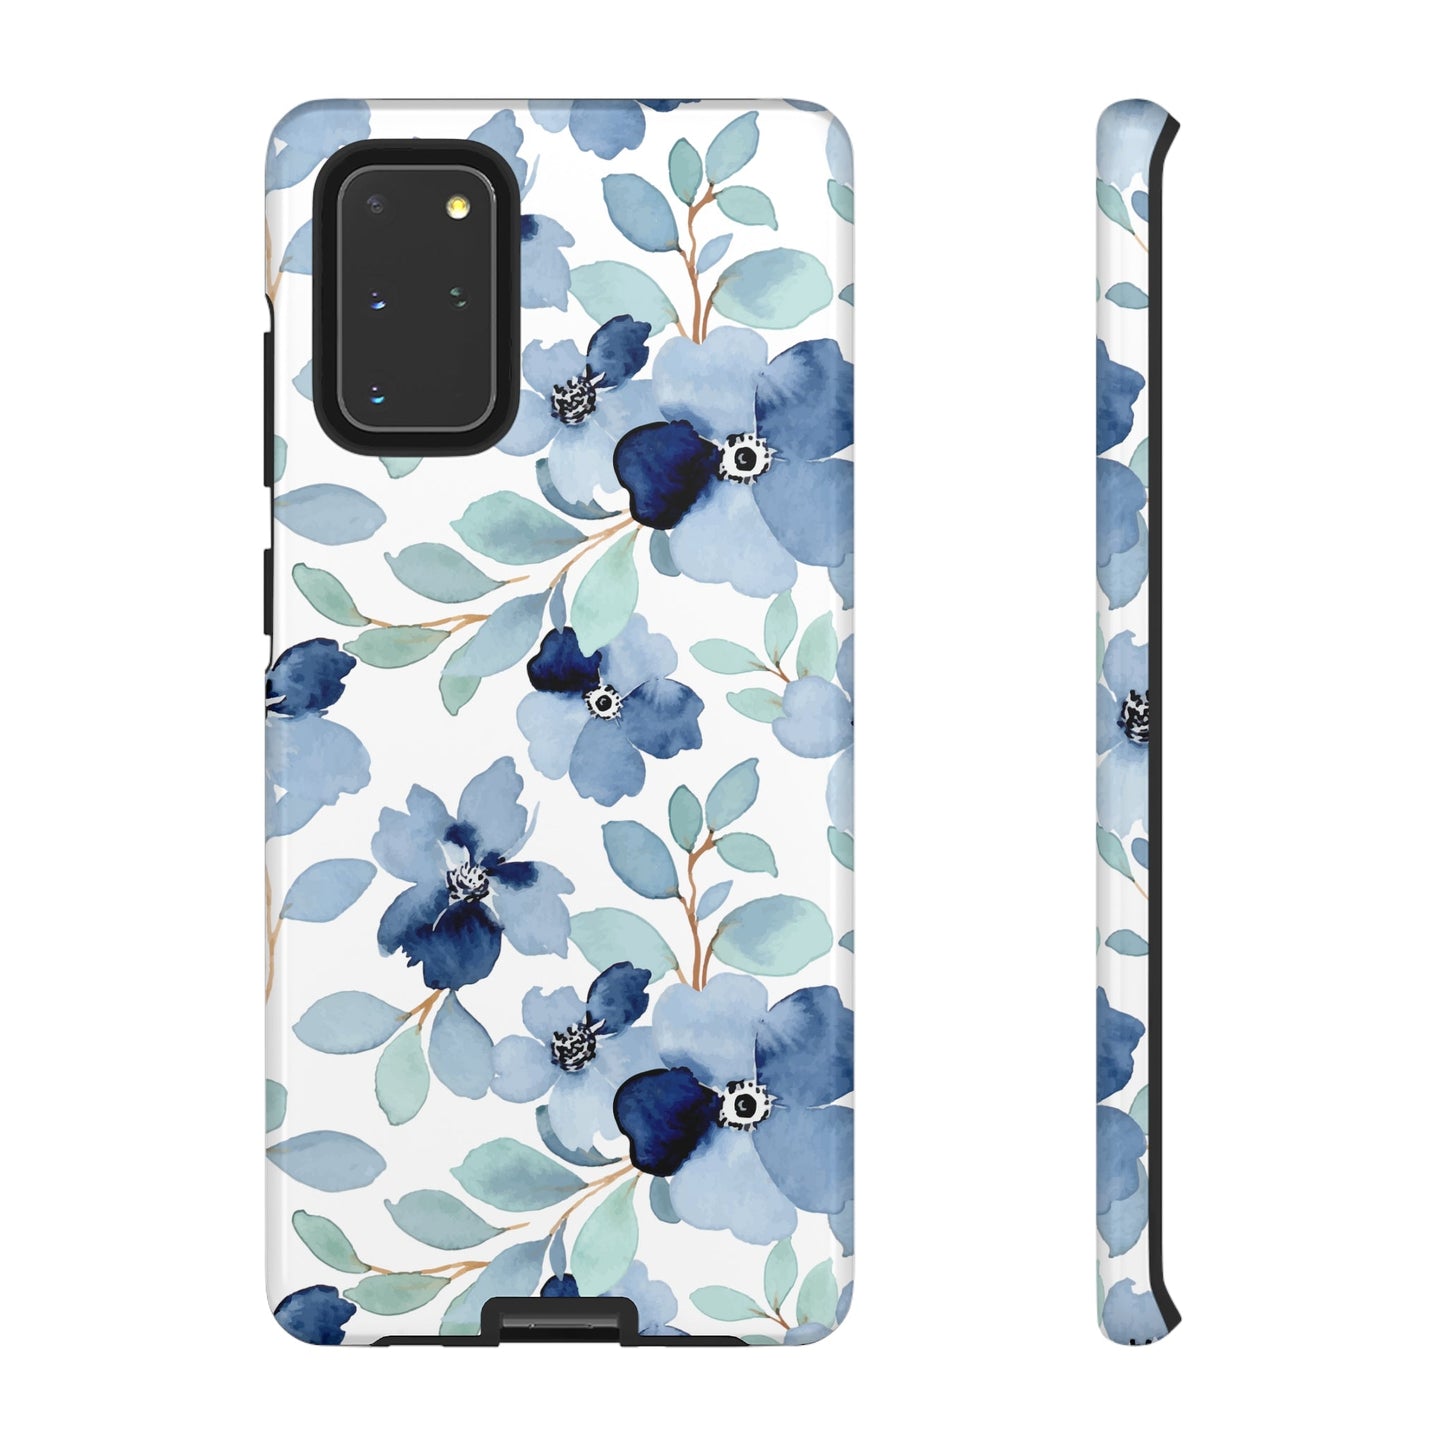 Phone case fits devices iPhone Samsung Galaxy Google Pixel - Cheerful Lane